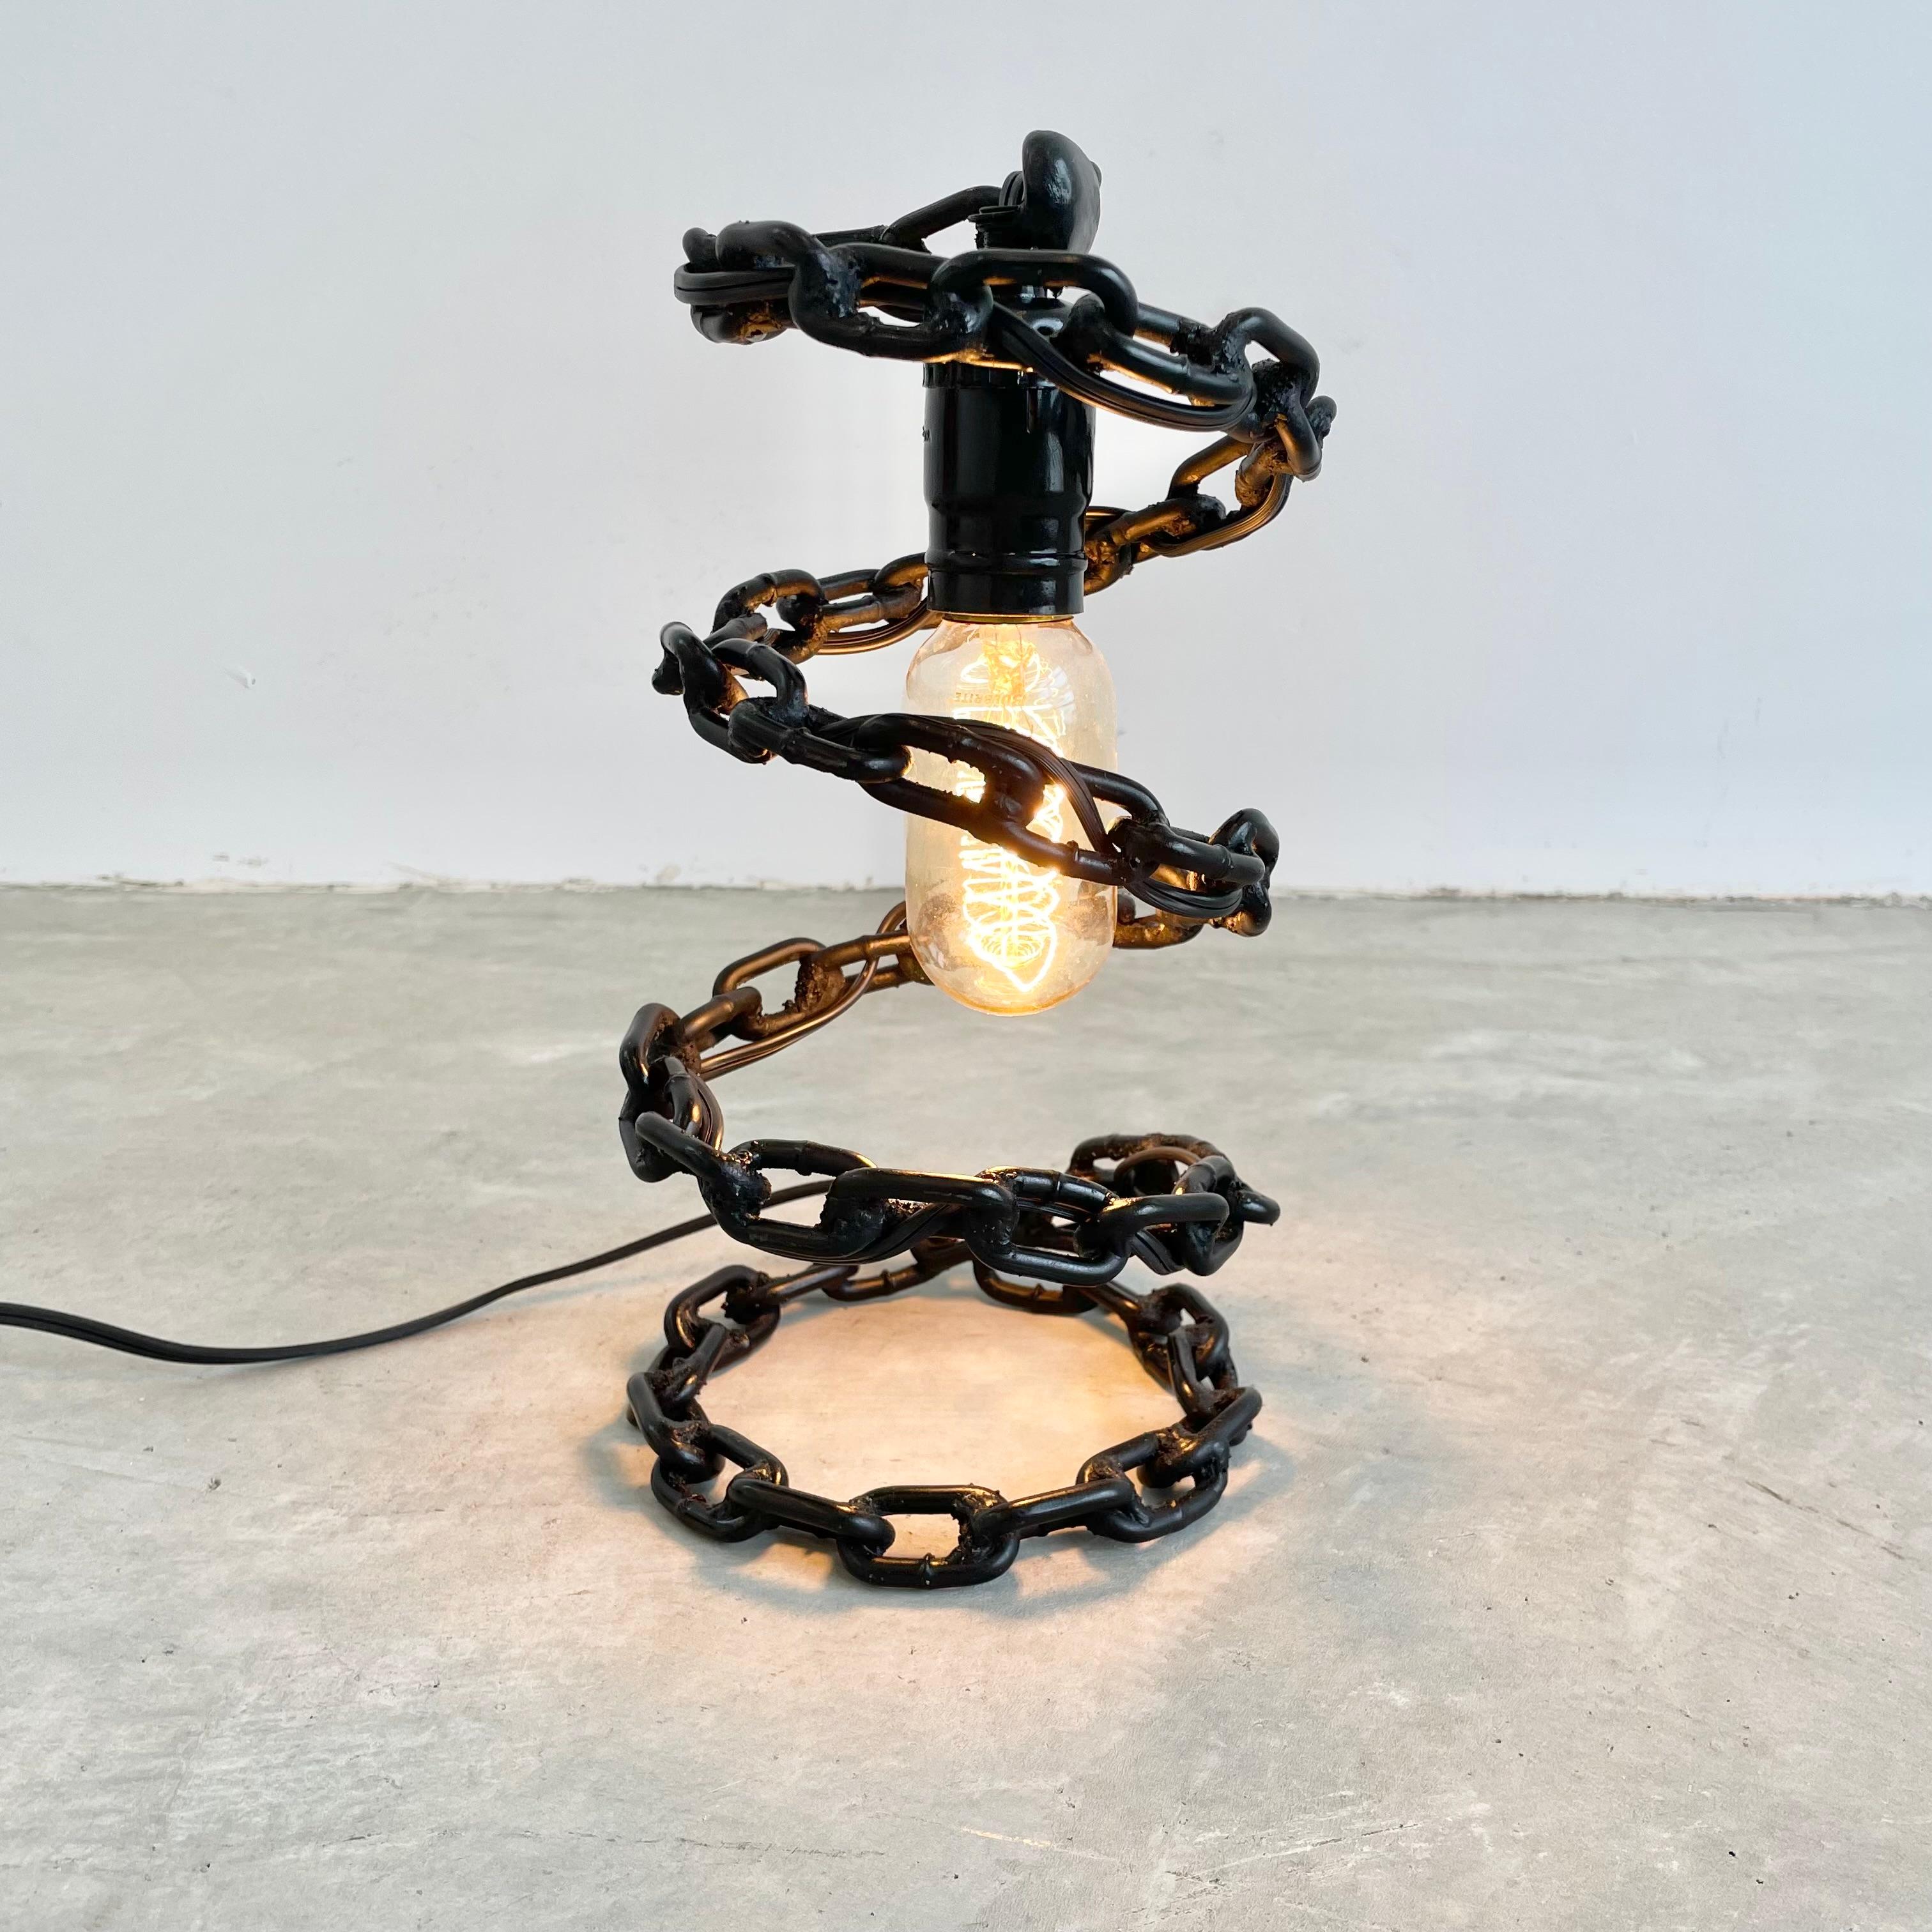 Brutalist iron chain link table lamp. Painted in a jet black paint and made of welded chain link with a great spiral design. Circular base with electric cord woven through the links. Great presence and perfect size for any table or desk. Very good